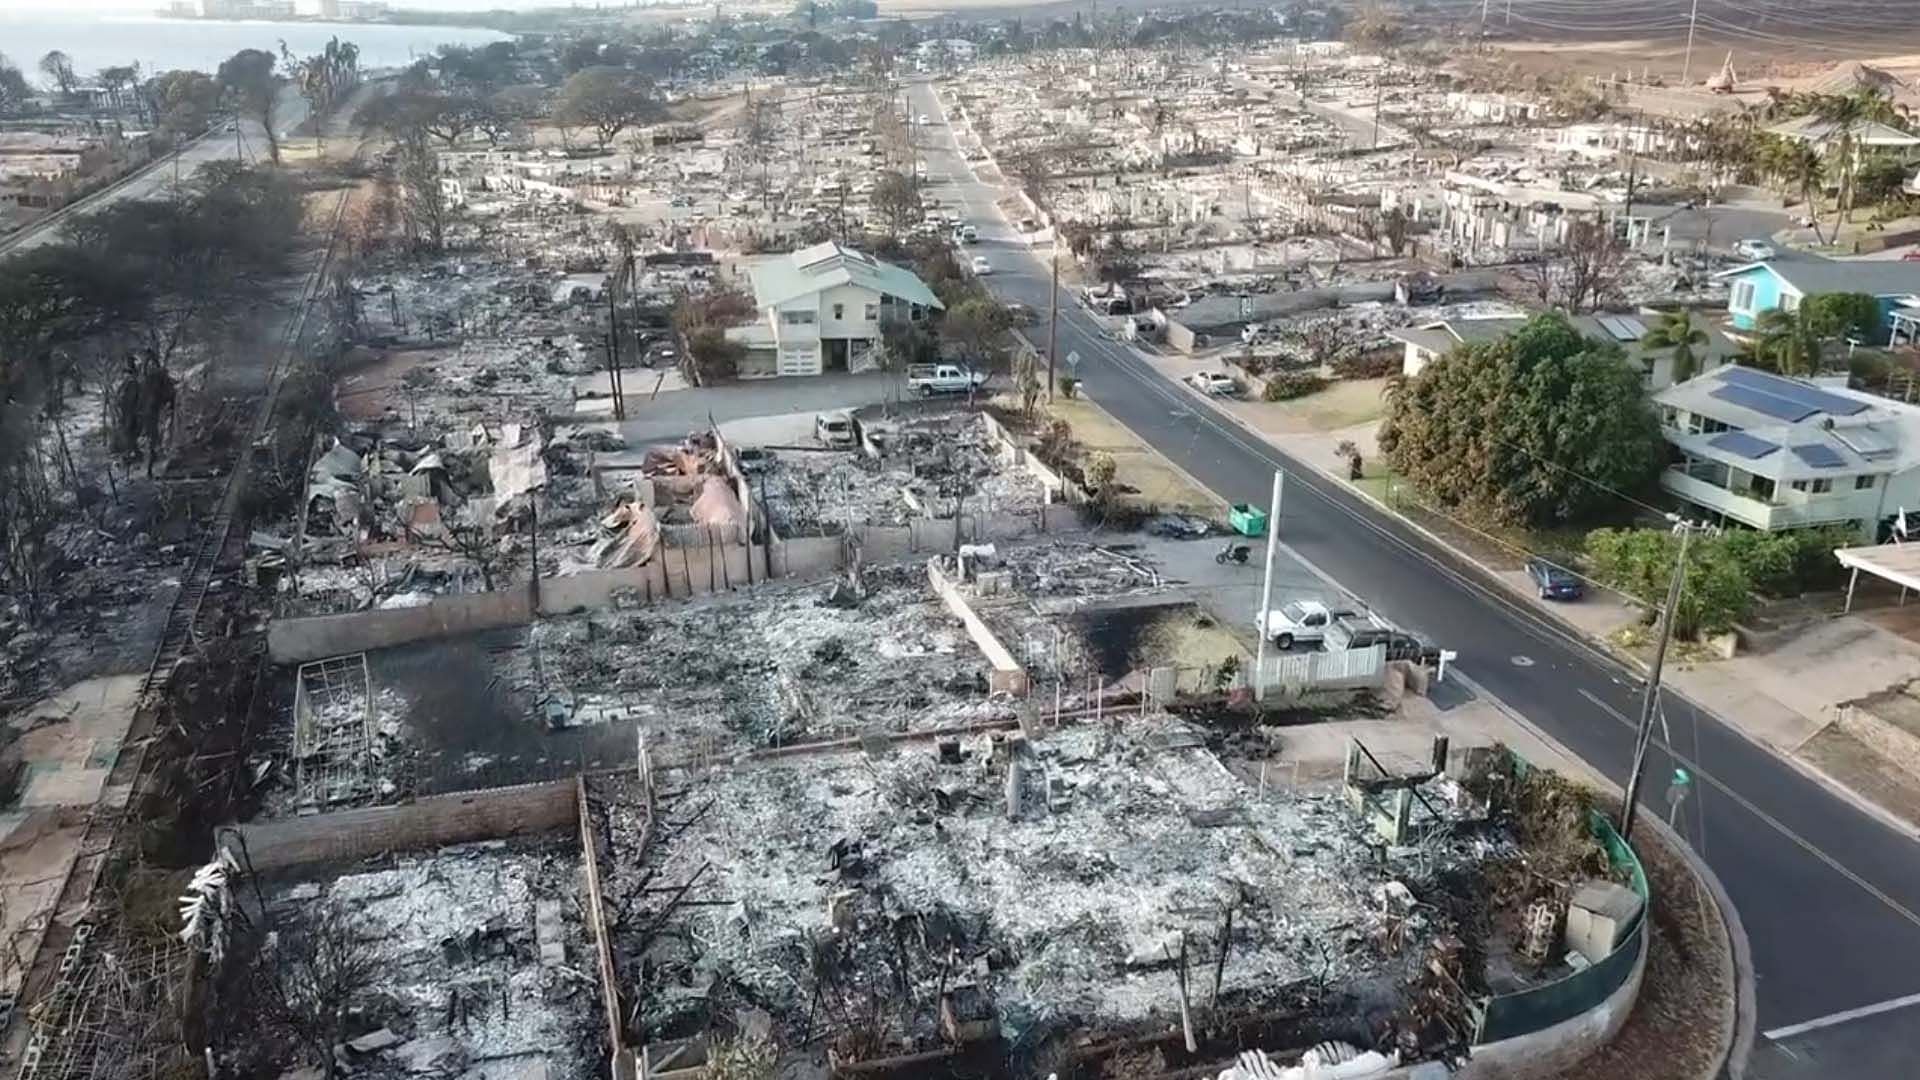 Authorities and locals survey extent of destruction in wake of the Maui wildfires (Image via Twitter/@digitalphotobuz)